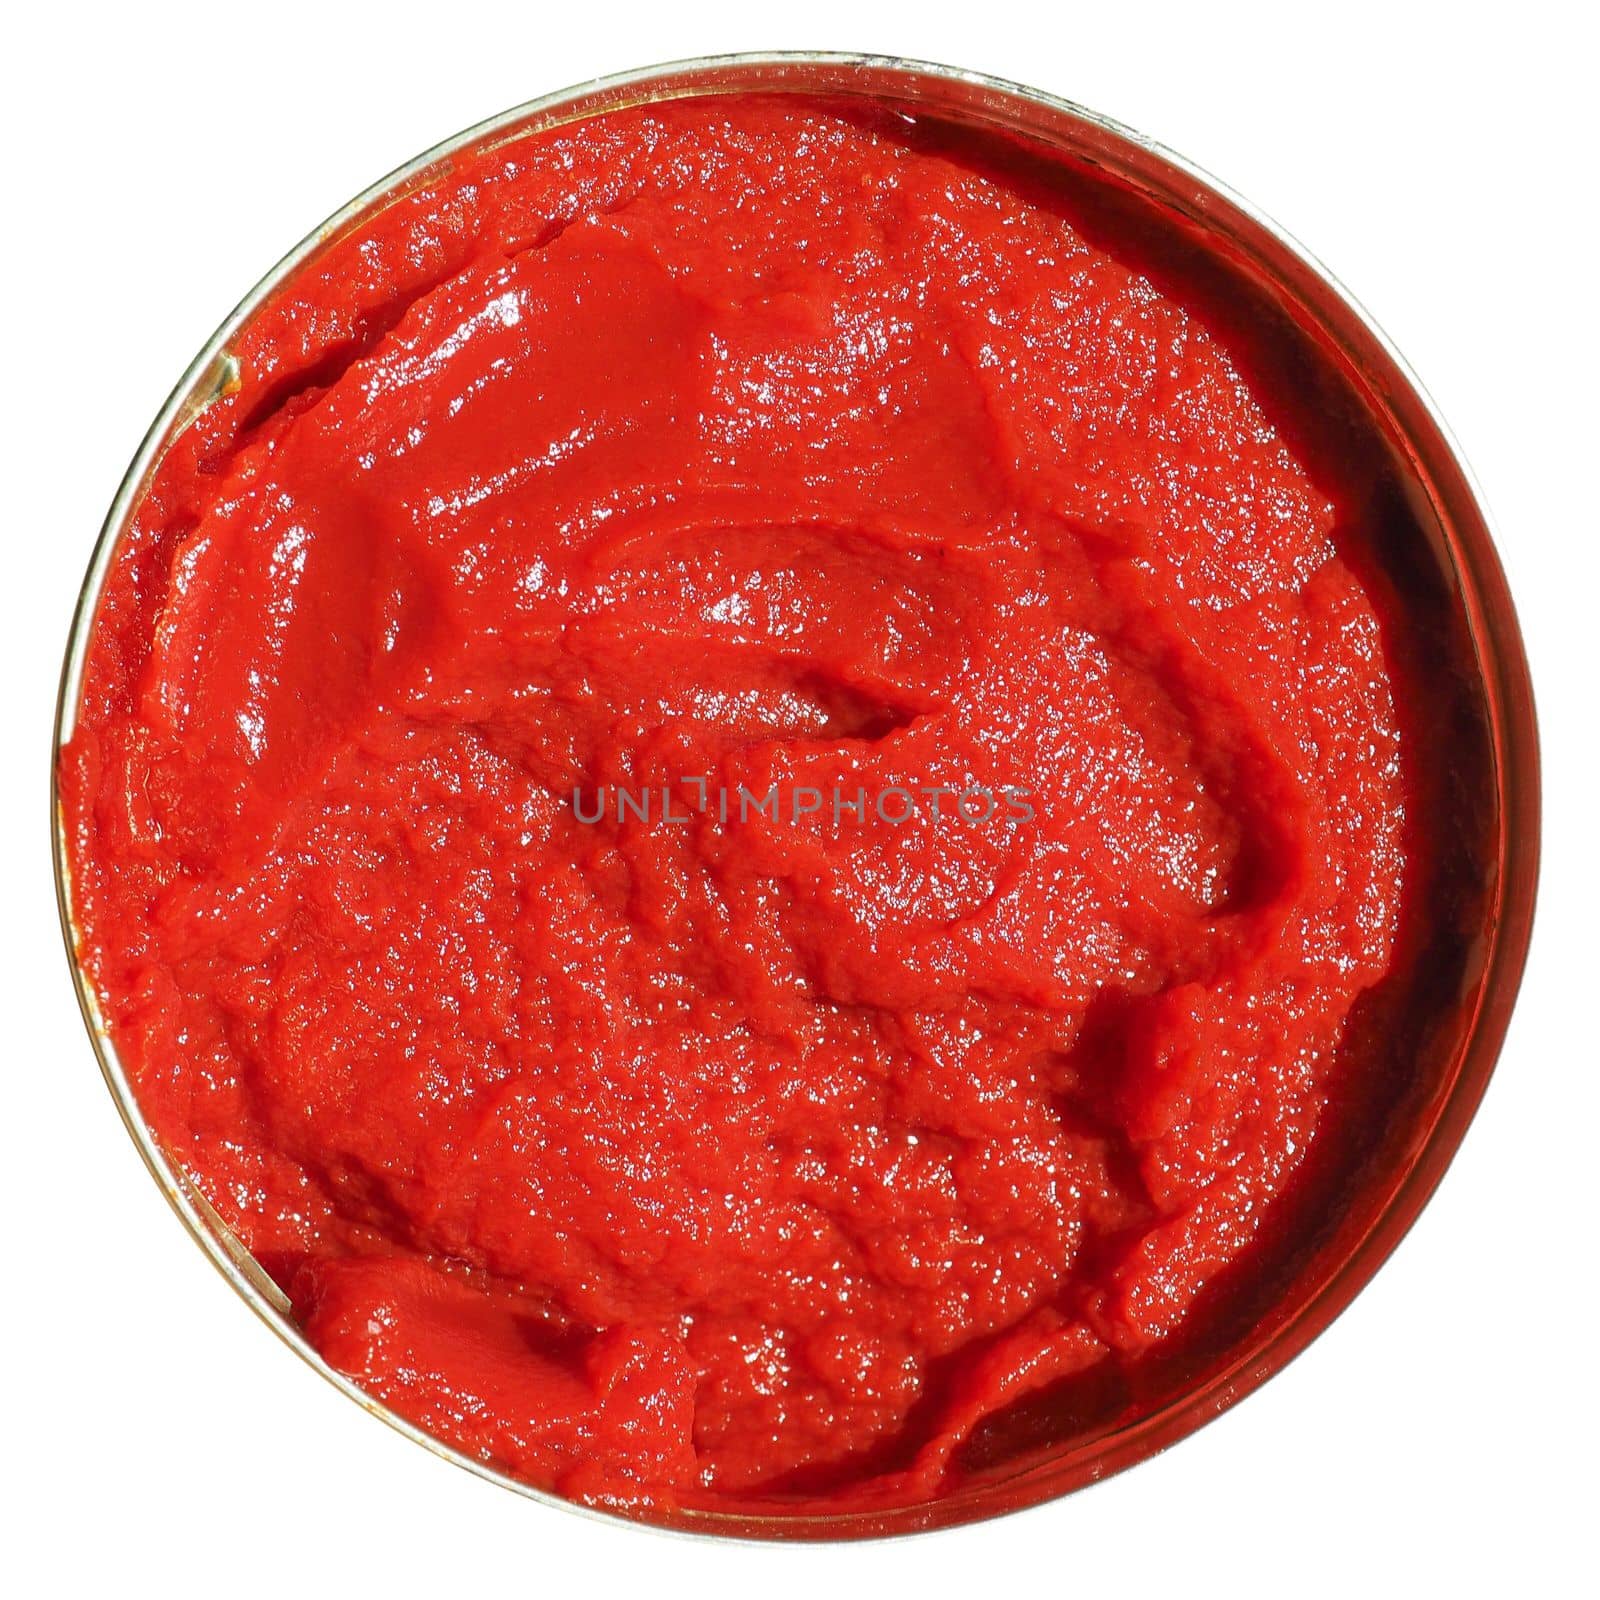 red tomato double concentrate ketchup sauce paste in a tin can isolated over white background